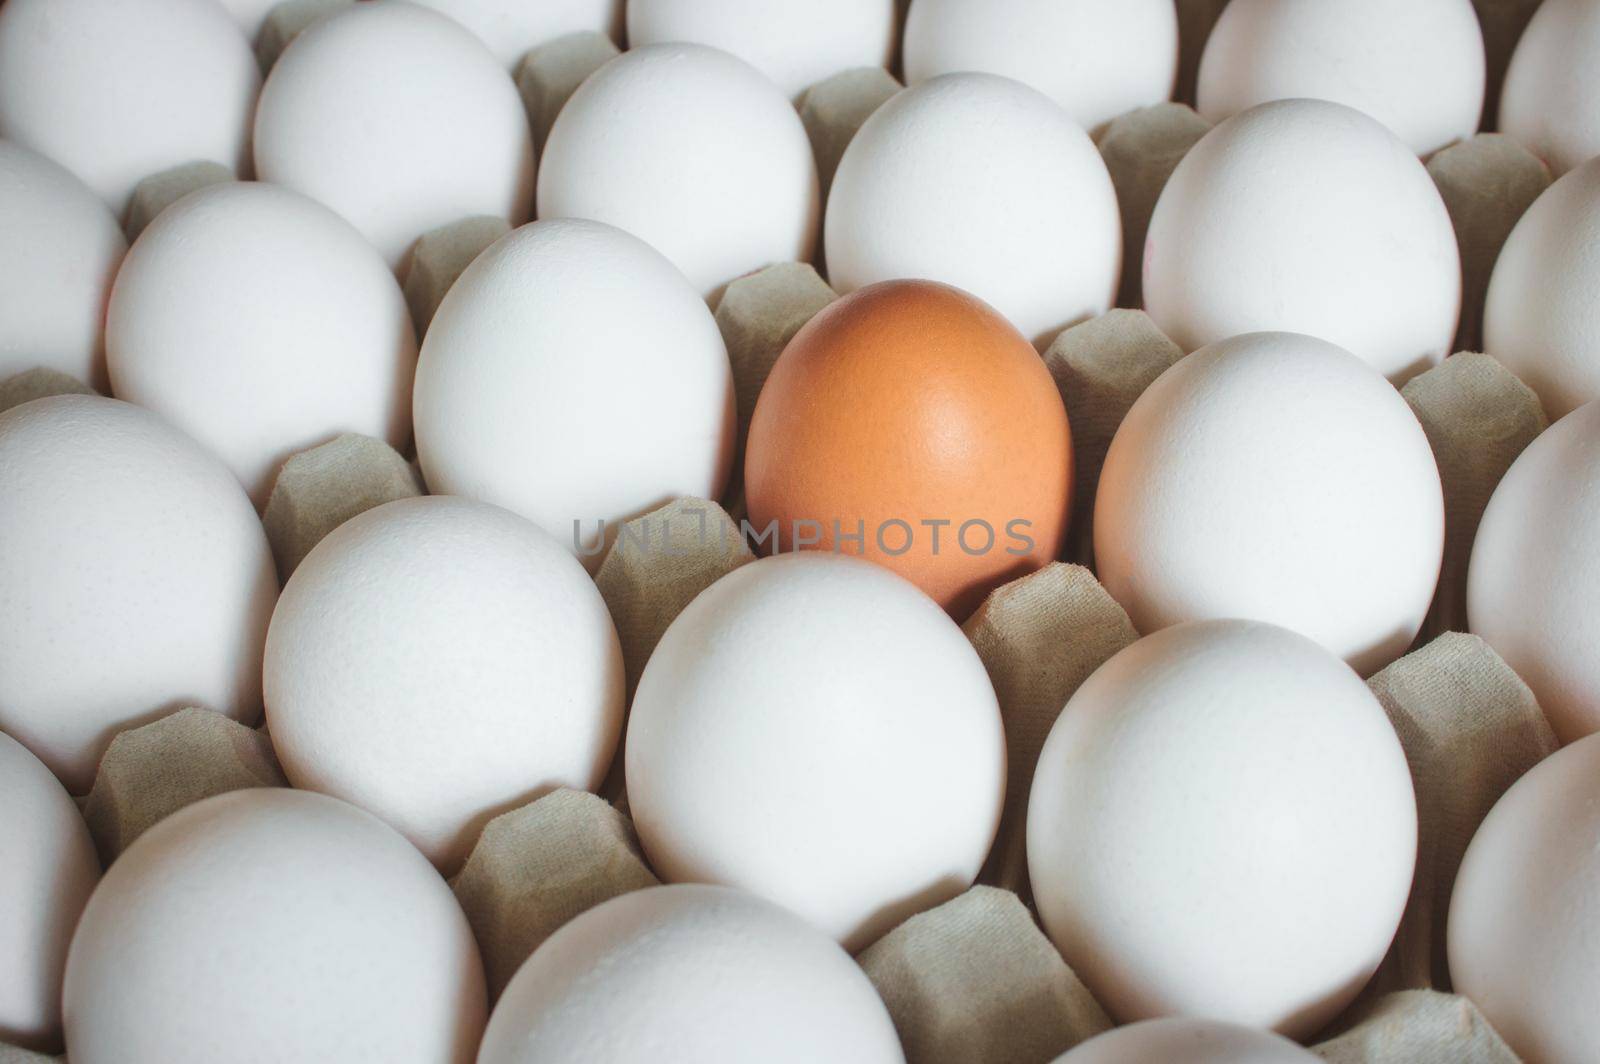 A brown egg standing out amongst a group of white eggs in a carton by tennesseewitney